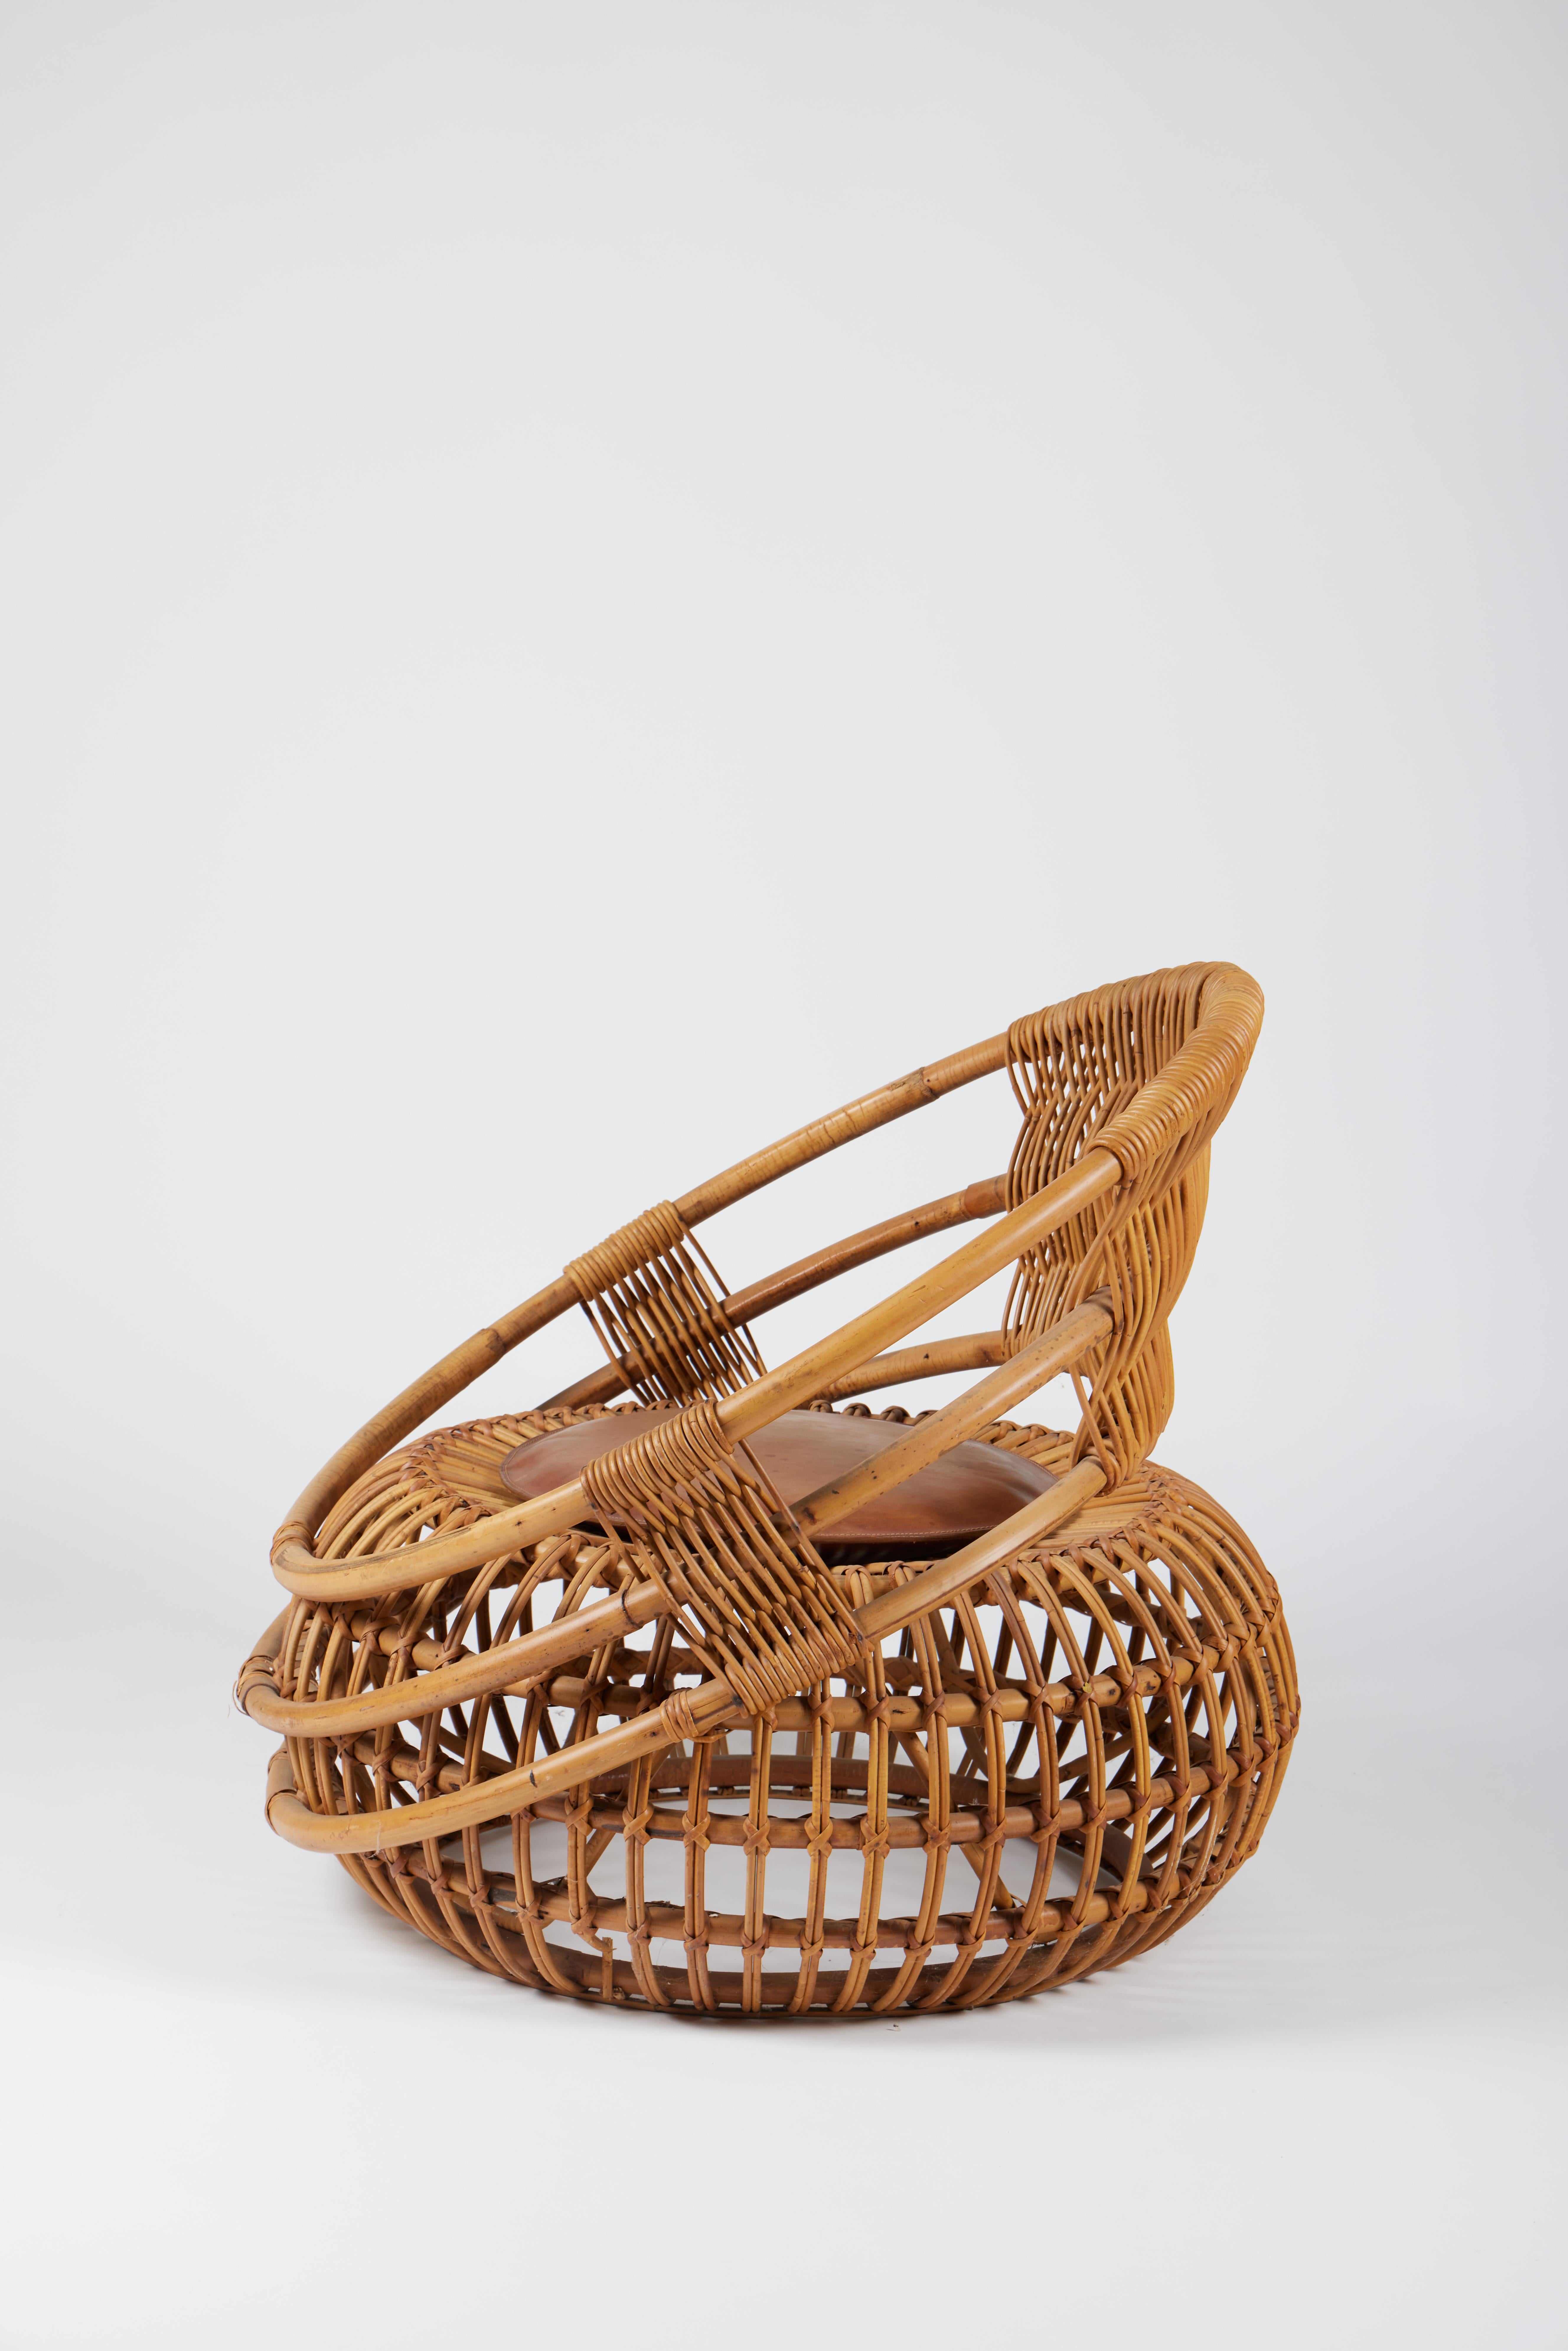 Ico Parisi, Mid-Century Modern Outdoor Set in Rattan for Bonacina, 1956 In Good Condition For Sale In Milan, IT